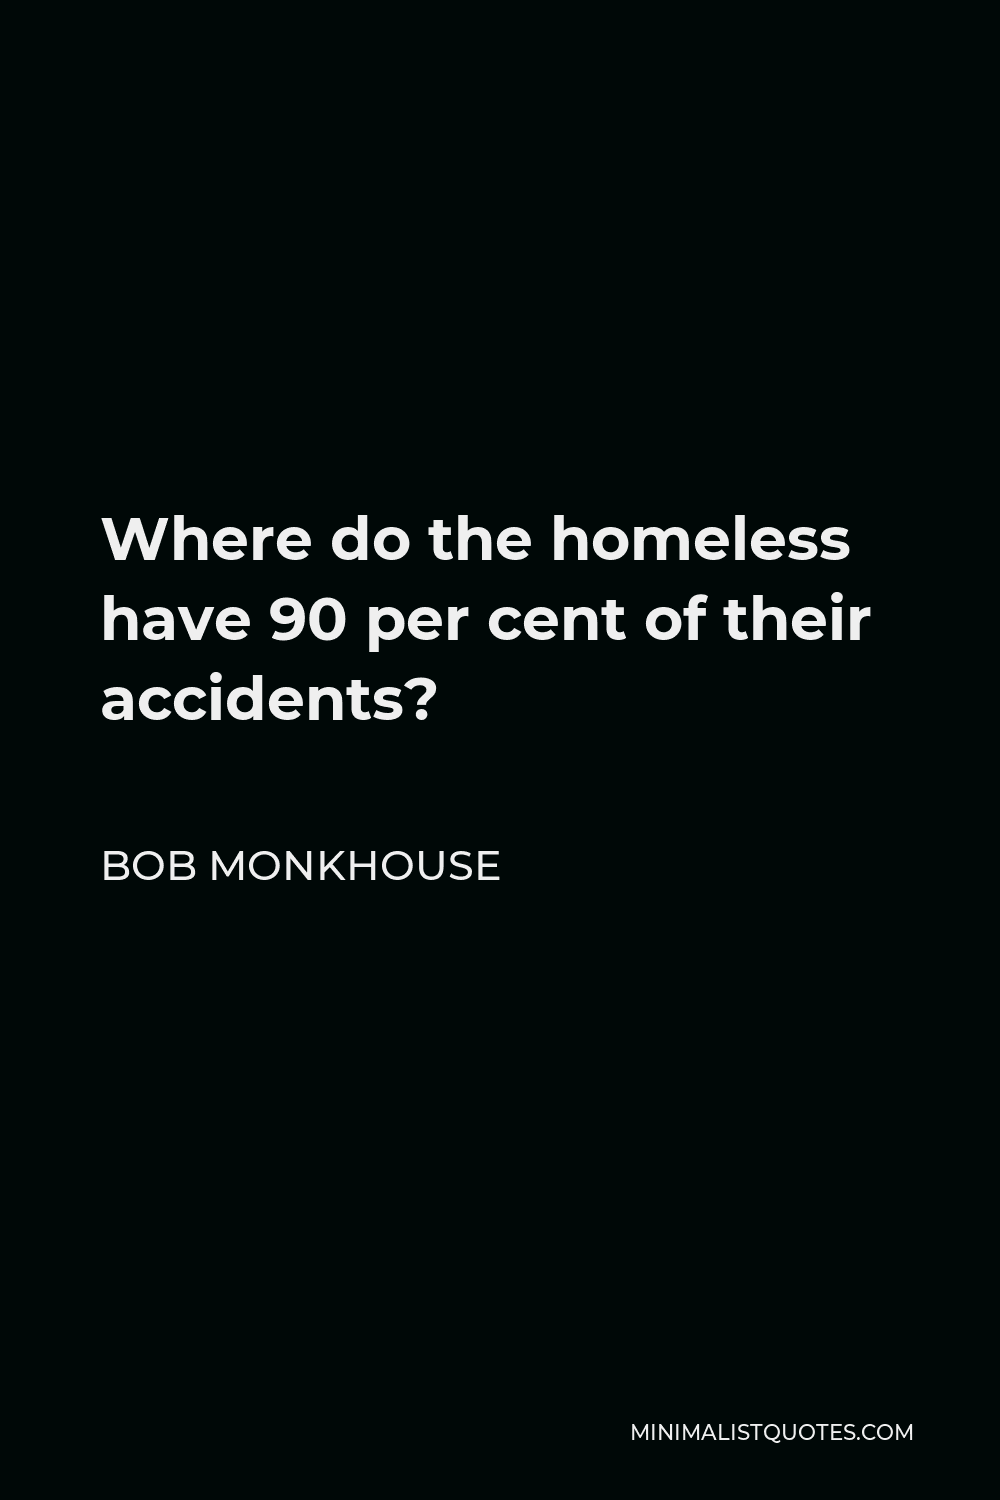 Bob Monkhouse Quote - Where do the homeless have 90 per cent of their accidents?